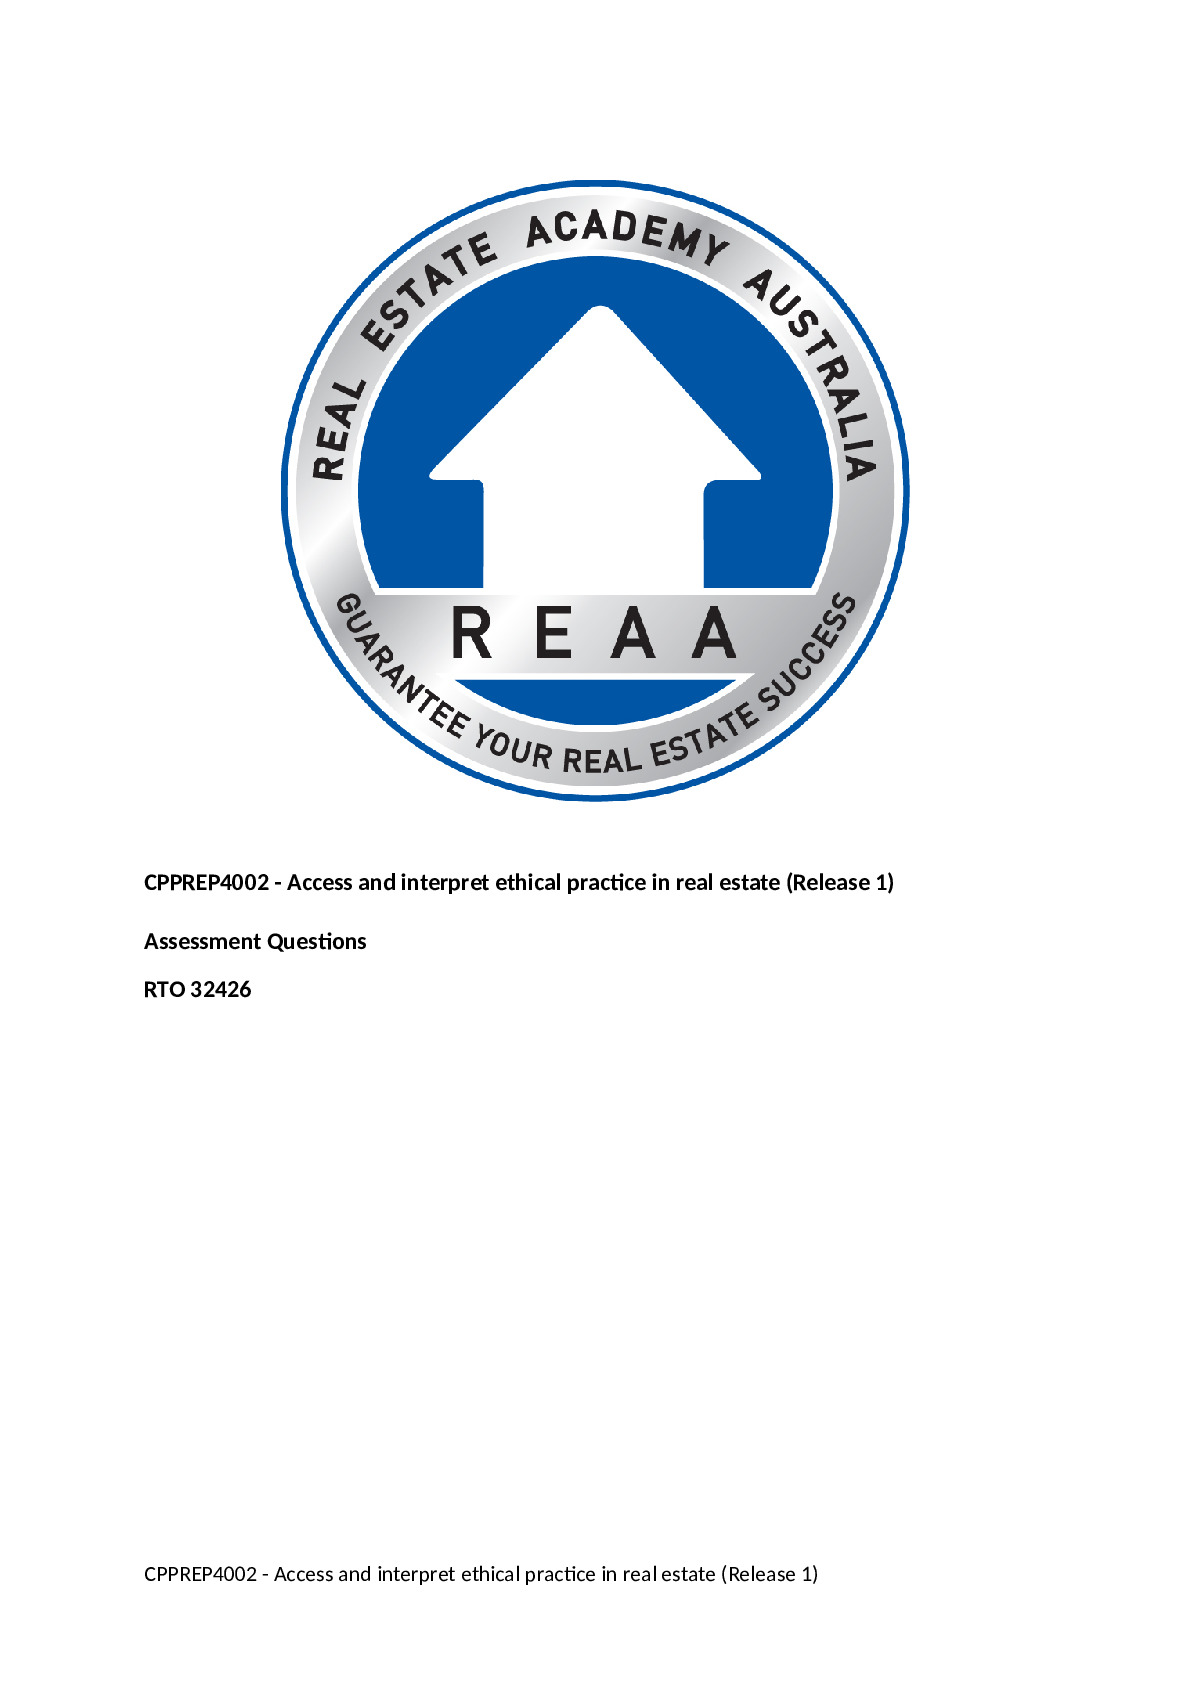 REAA___CPPREP4002___Assessment_Questions_v1.2.docx